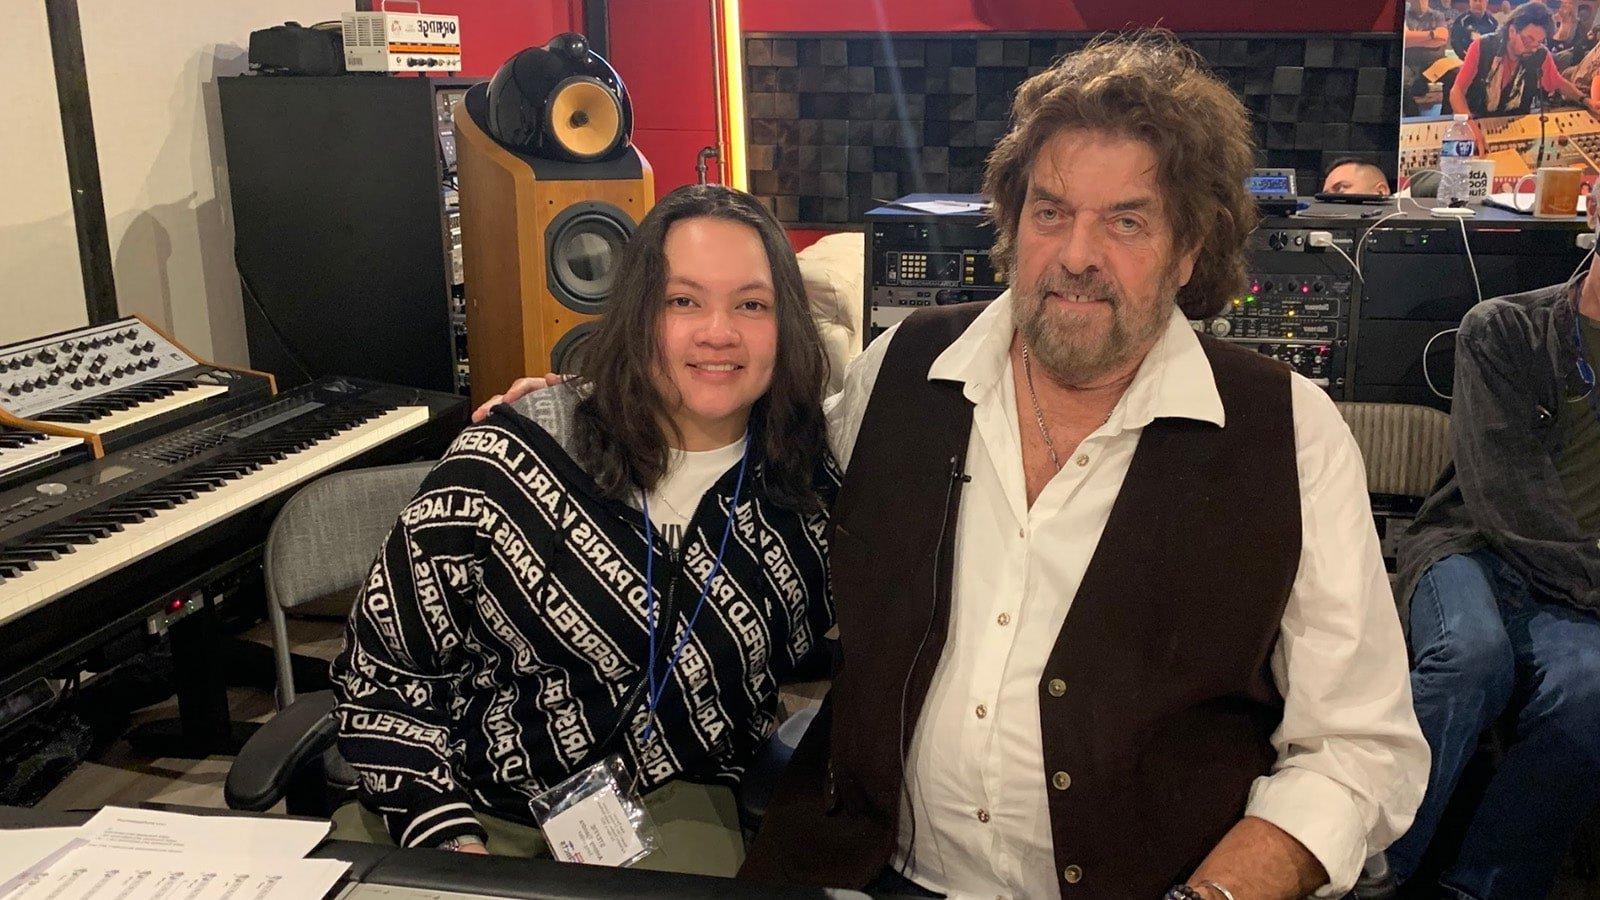 Alan Parsons sits with Steffie Tj和ra in front of a mixing board in a recording studio. They are smiling at the camera.